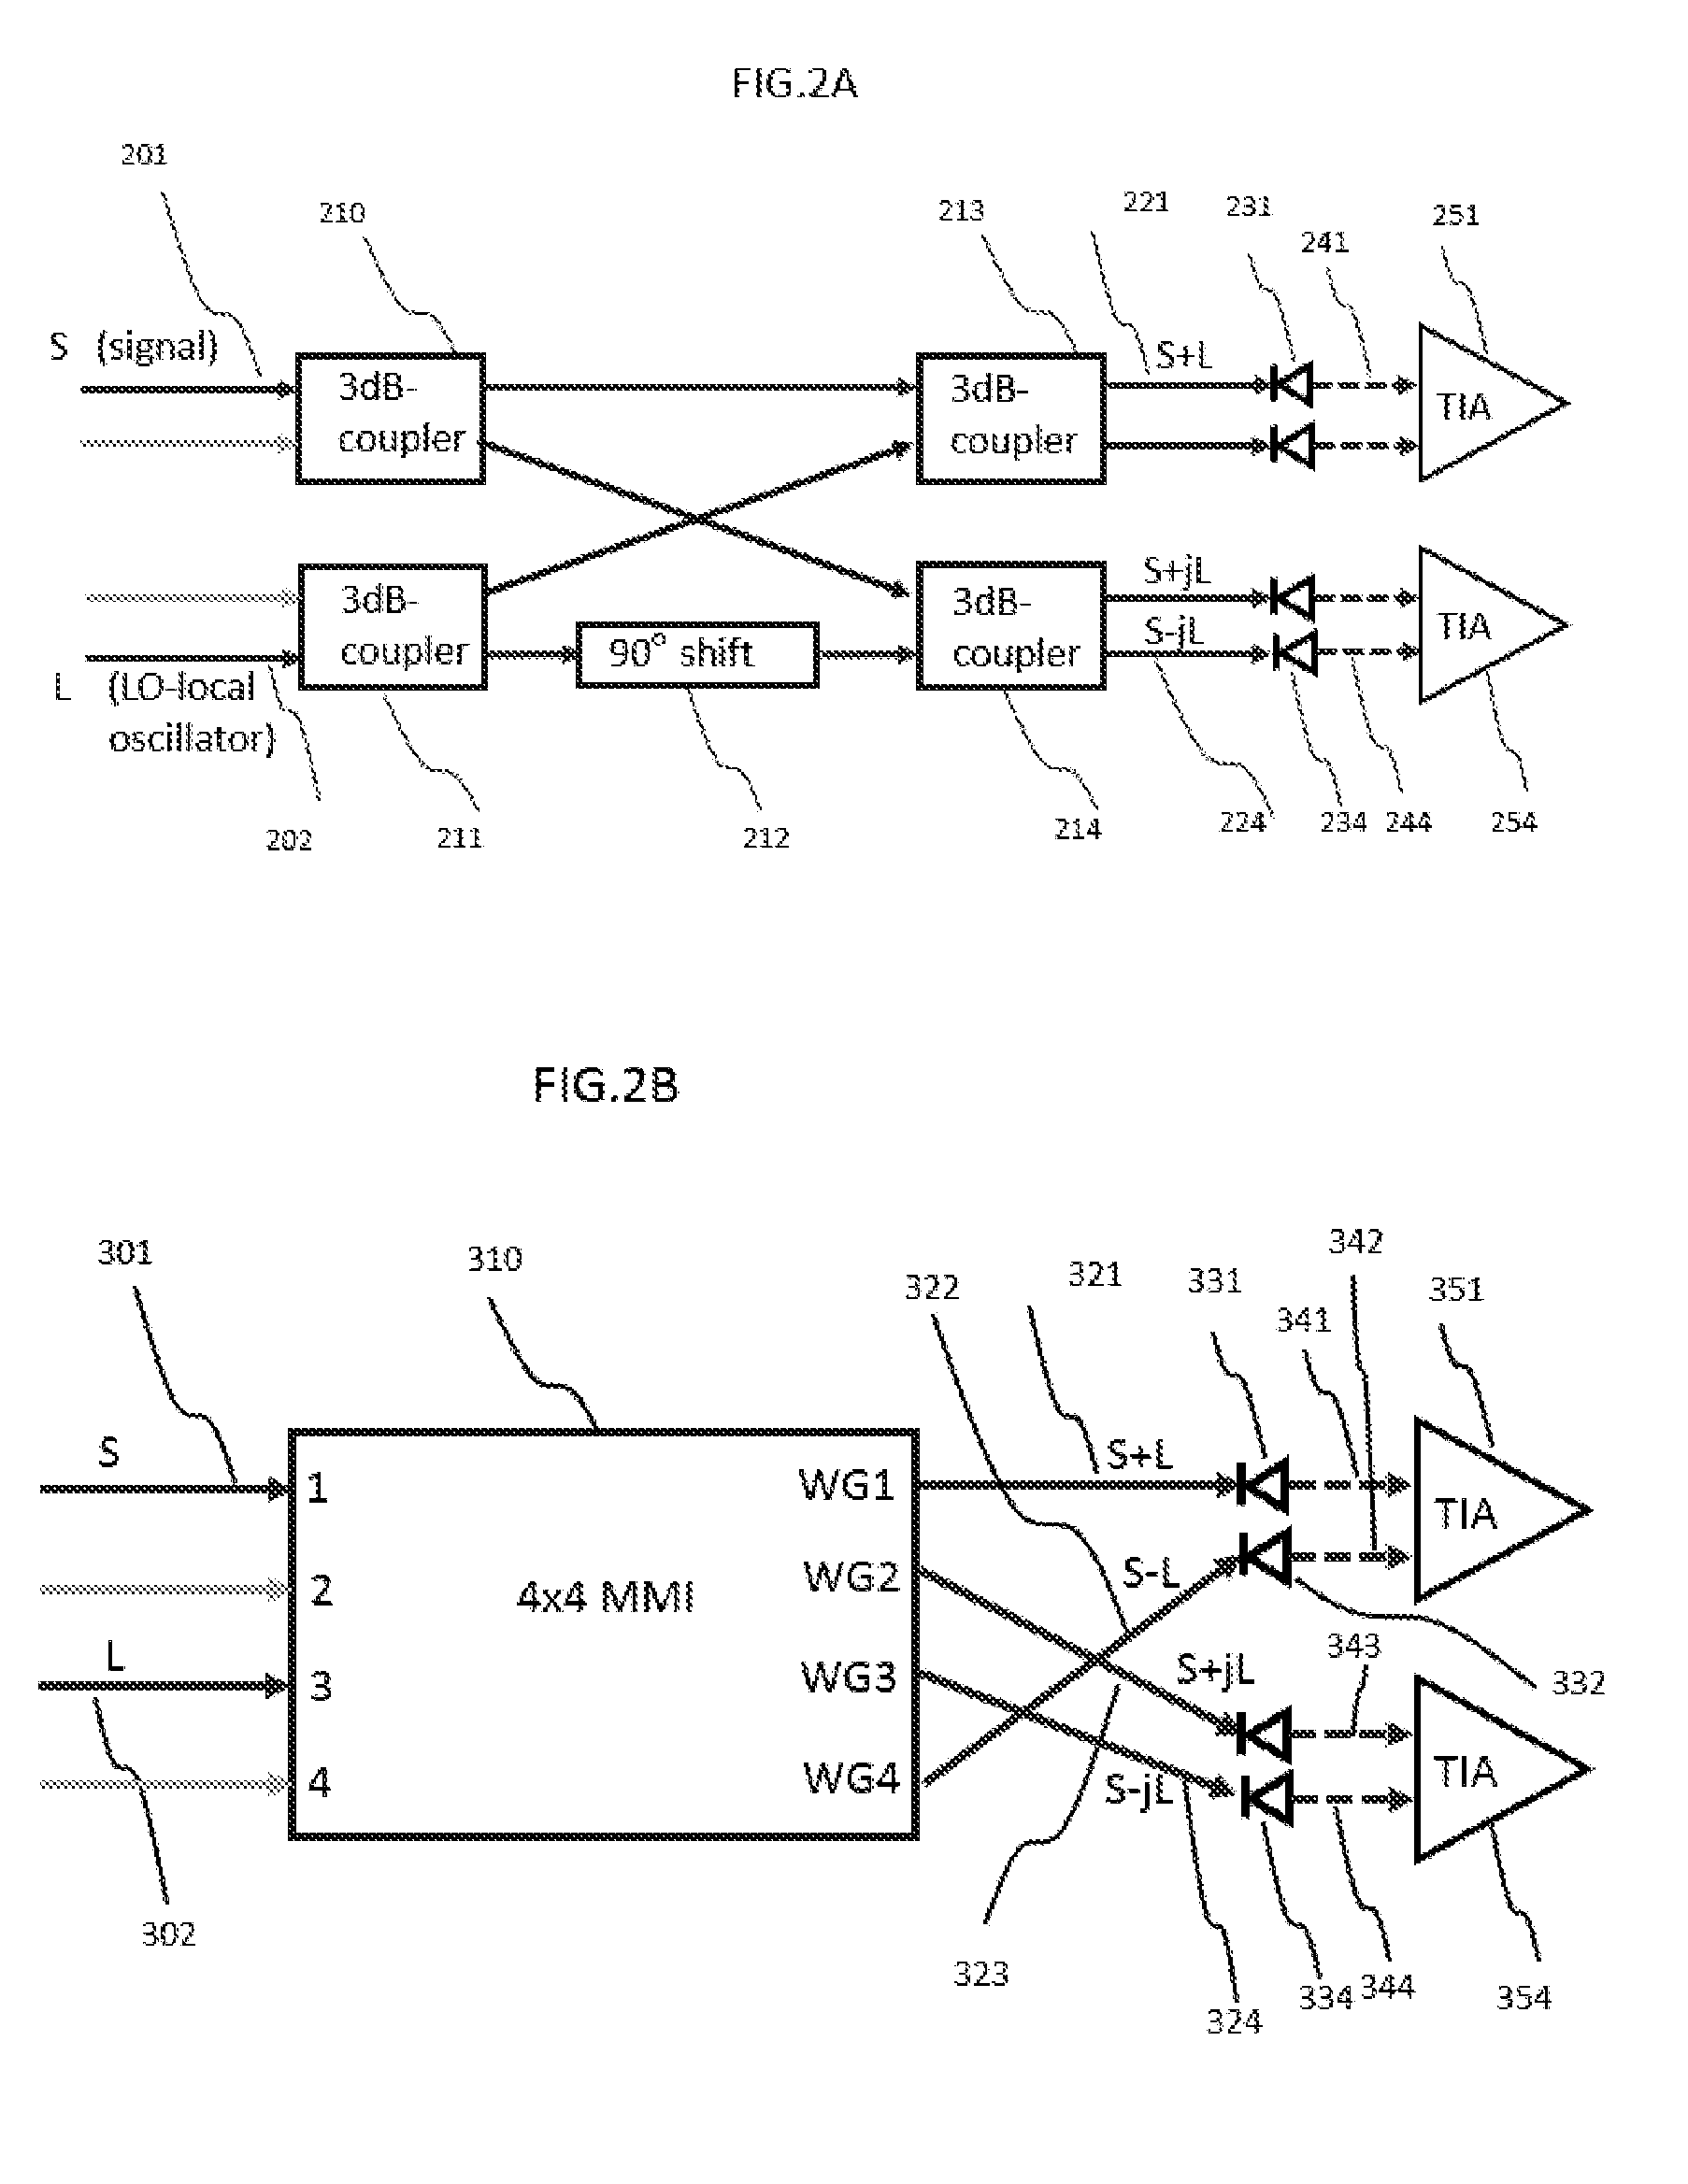 Integrated Coherent Receiver Having a Geometric Arrangement for Improved Device Efficiency